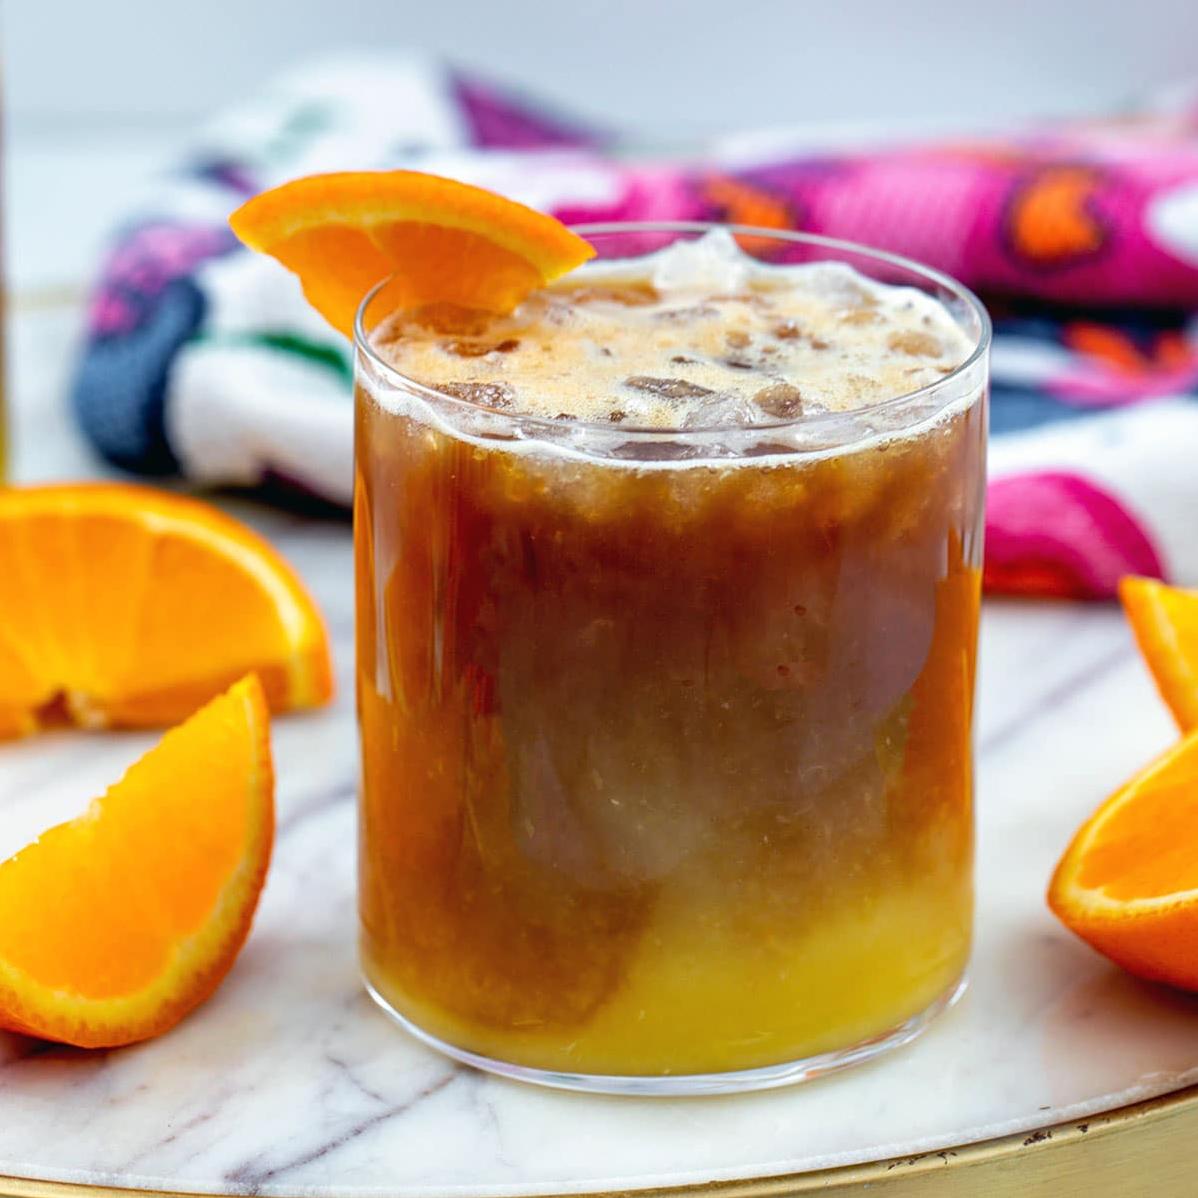  Wake up your taste buds with a zesty cup of orange coffee!